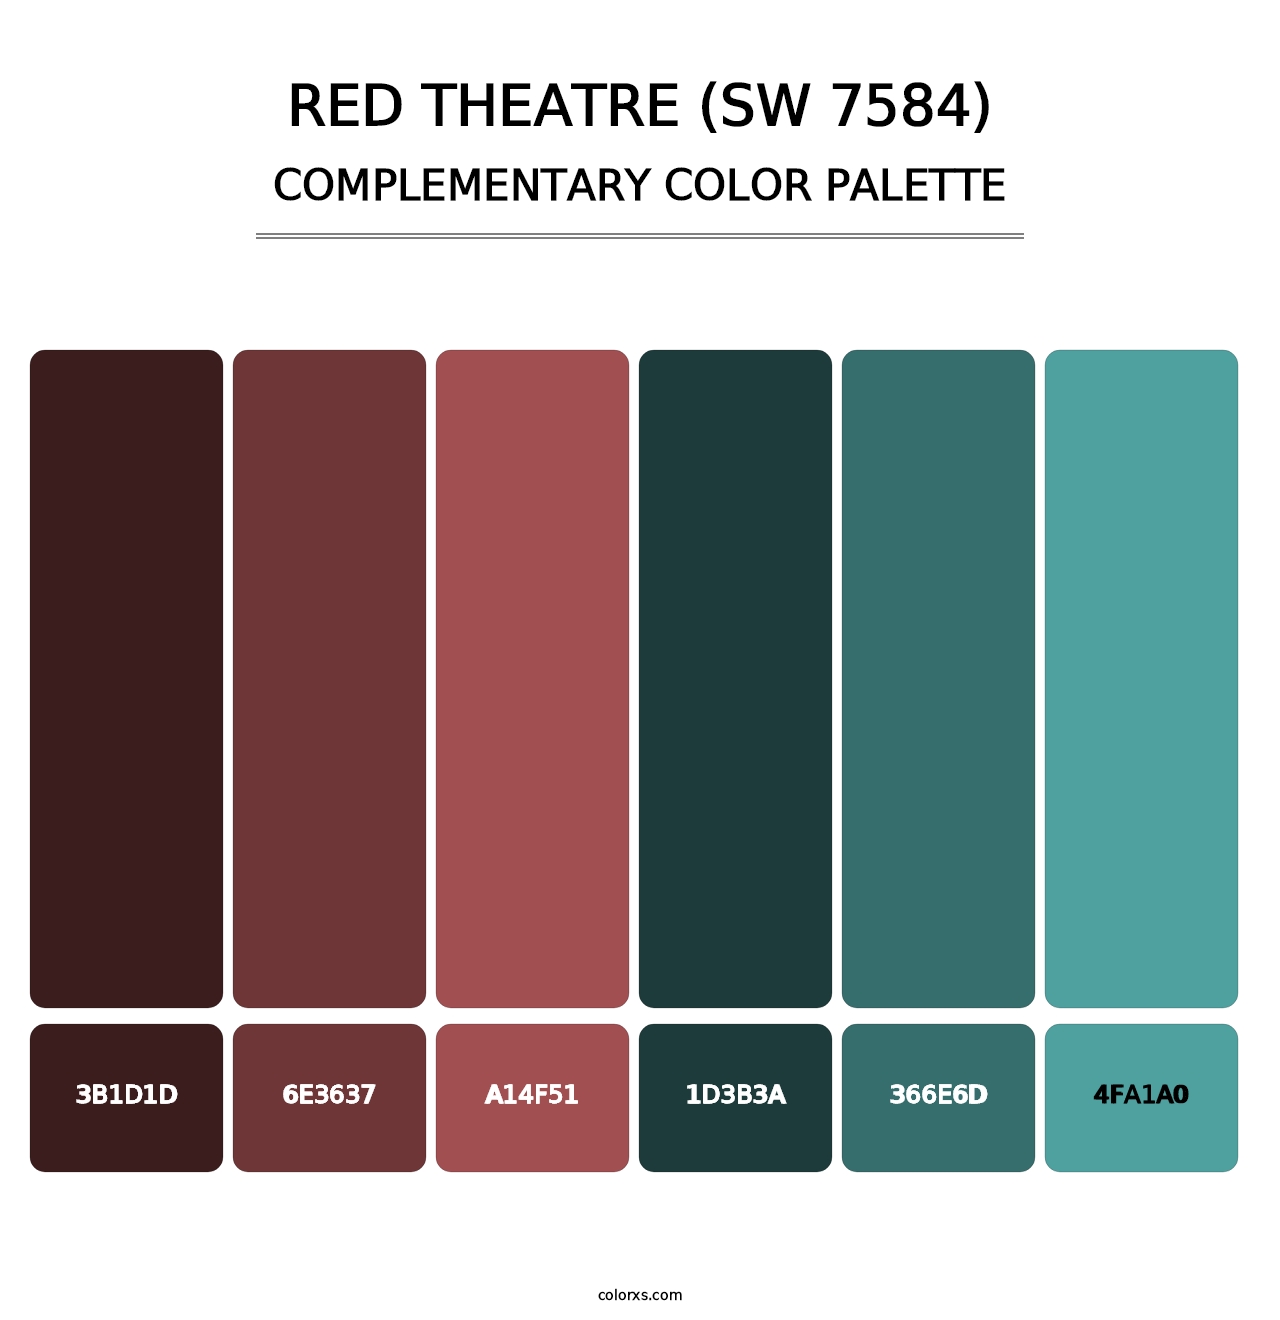 Red Theatre (SW 7584) - Complementary Color Palette